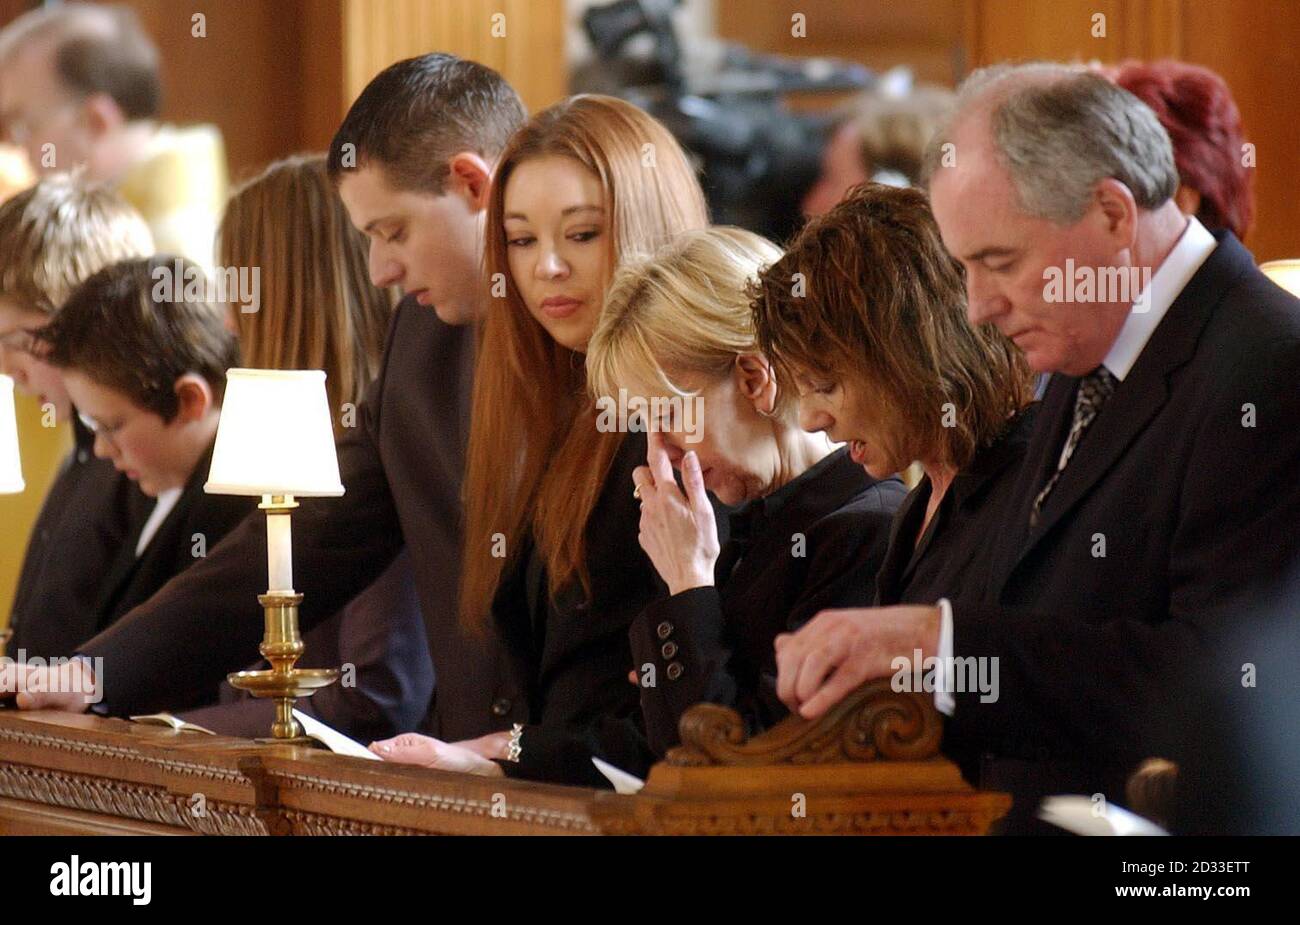 Mrs Lynn Lloyd wipes away a tear, watched by her daughter Chelsea (4th right), during a special service to celebrate the life and work of her late husband Terry Lloyd of ITN (Independant Television News), held at St Brides Church, Fleet Street London. The 51-year-old broadcast veteran was killed on the road to Basra just days into the war in Iraq. Stock Photo